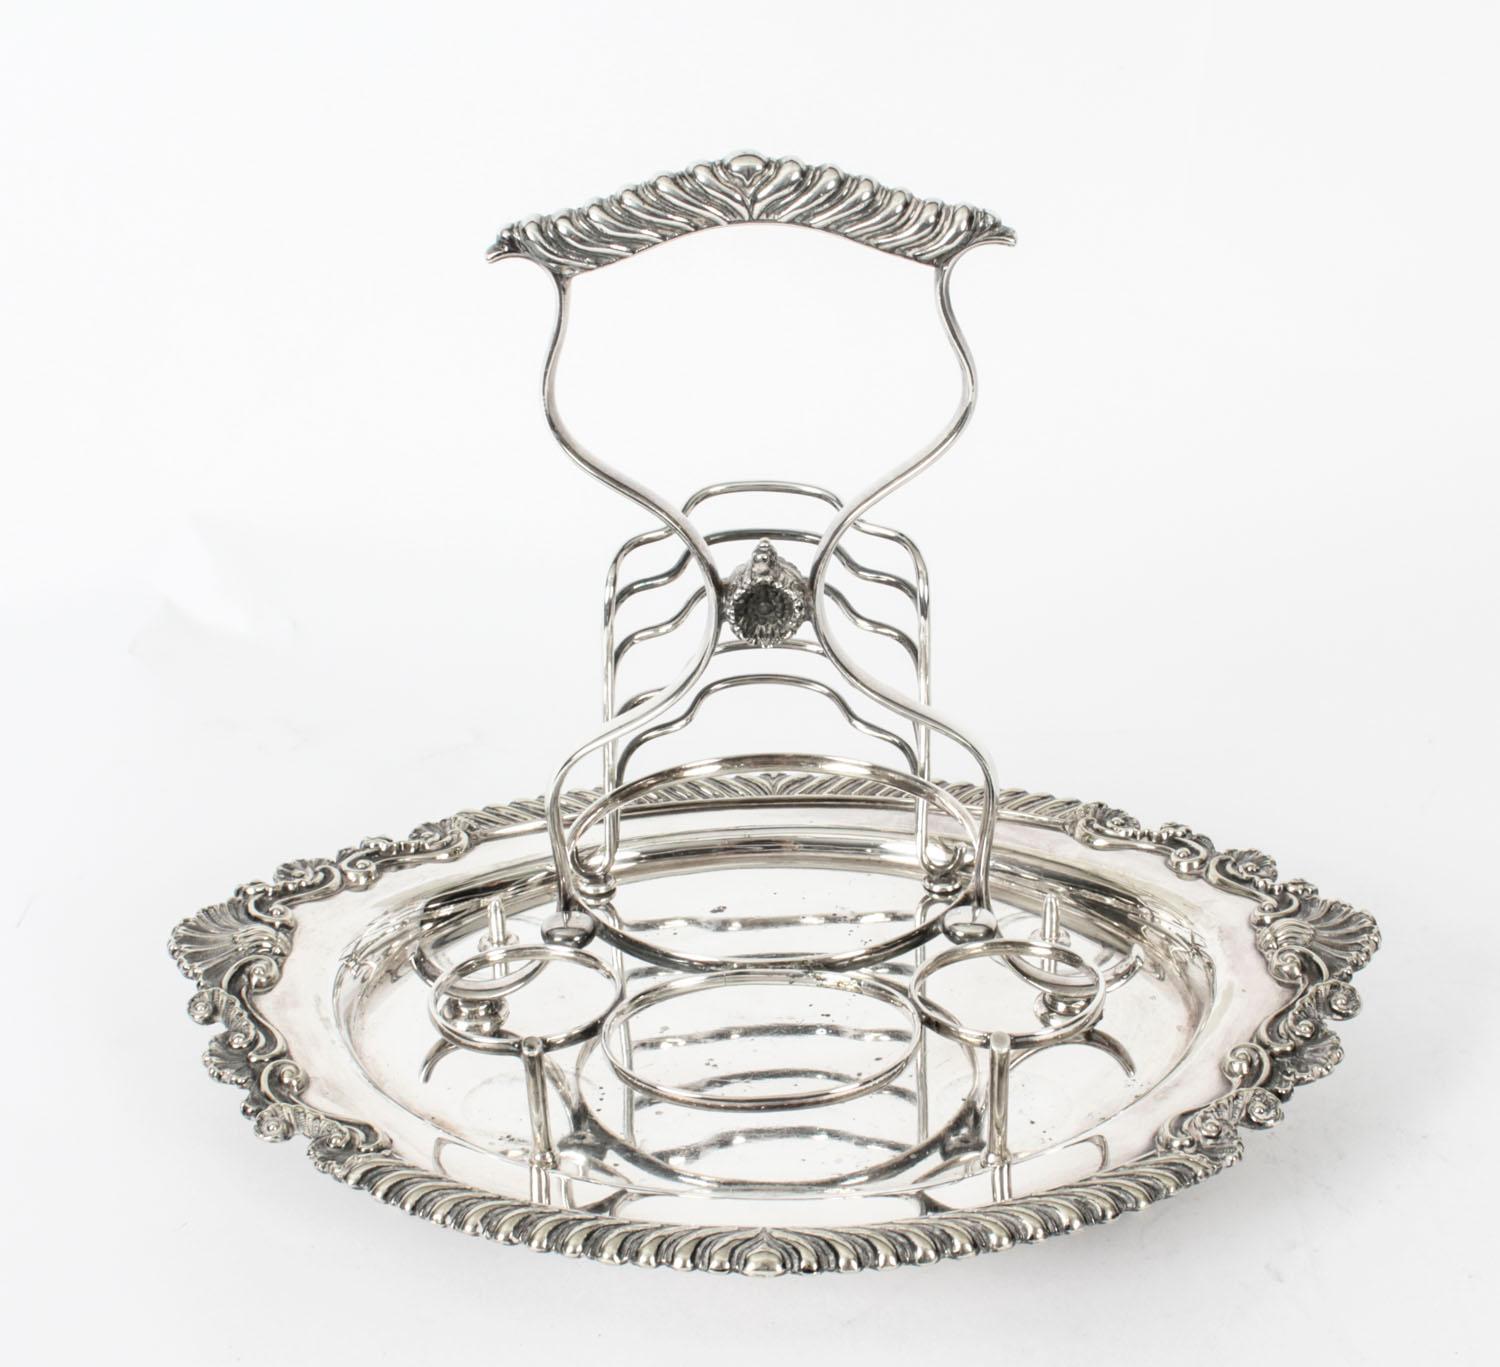 Antique Victorian Silver Plated Breakfast Set Toast Rack, 19th Century 9